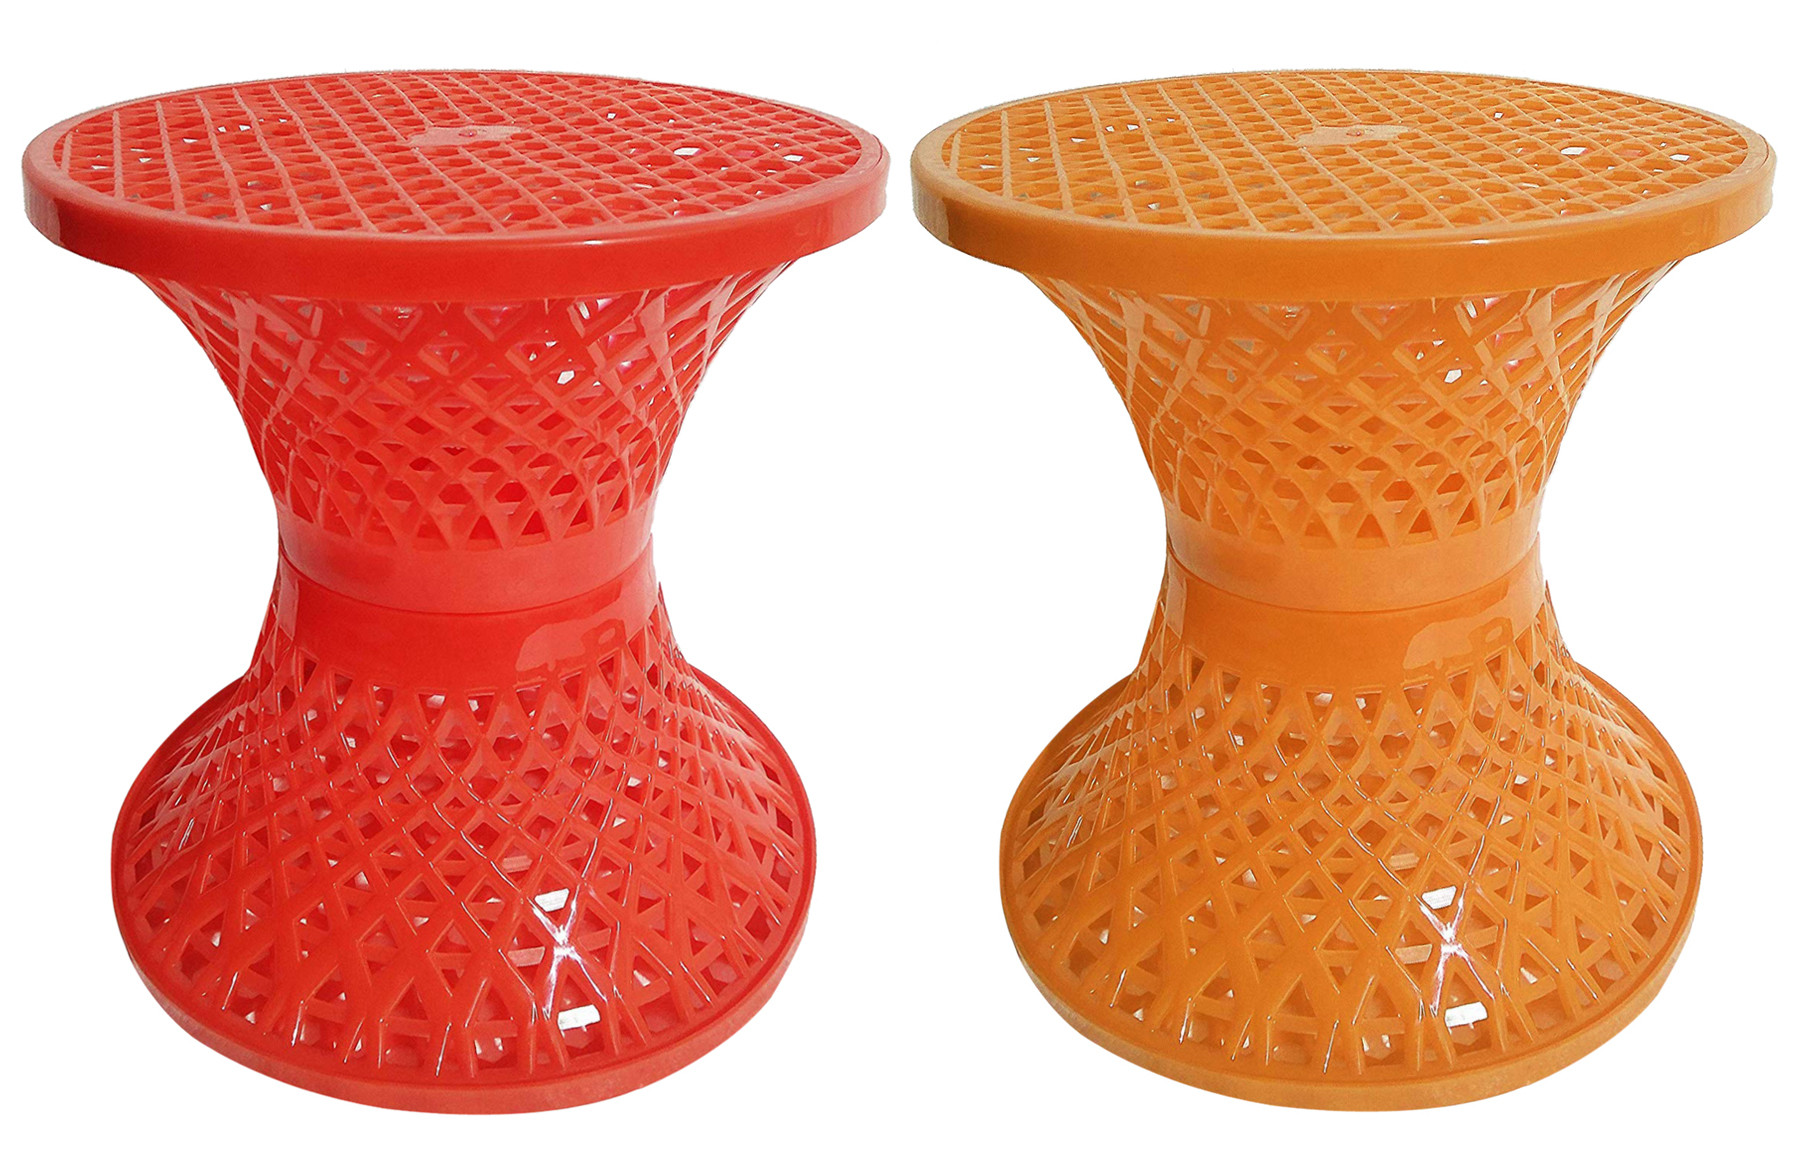 Kuber Industries Mesh Design Both Sided Plastic Sitting Stool, Planter Stand, Sidetable For Living Room, Bed Room, Garden in Damroo Style- Pack of 2 (Orange & Yellow)